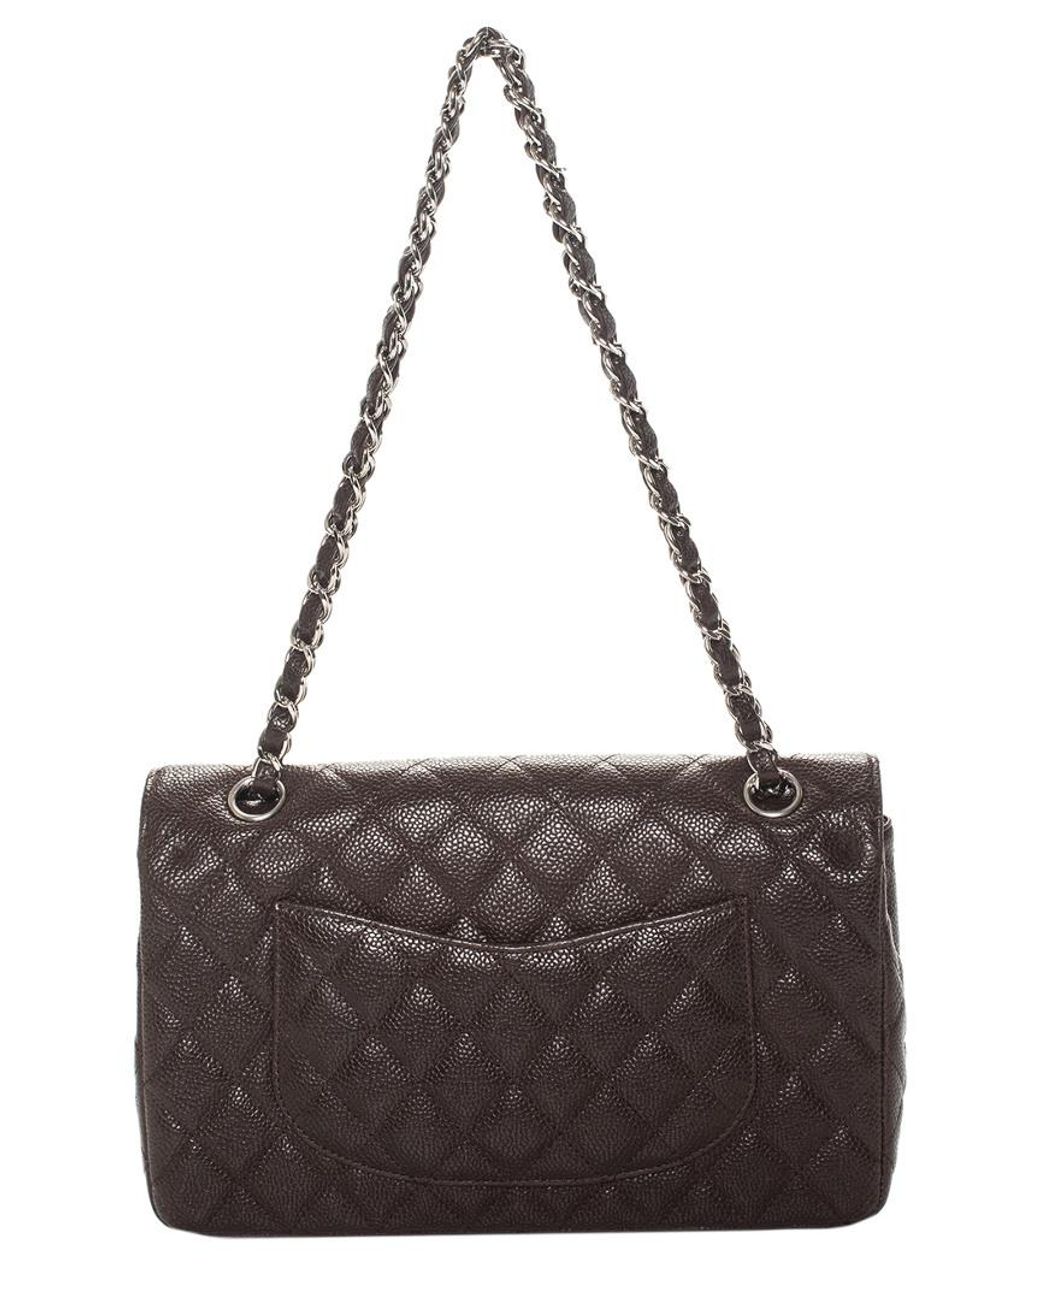 Chanel Dark Brown Quilted Caviar Leather Medium Double Flap Bag | Lyst